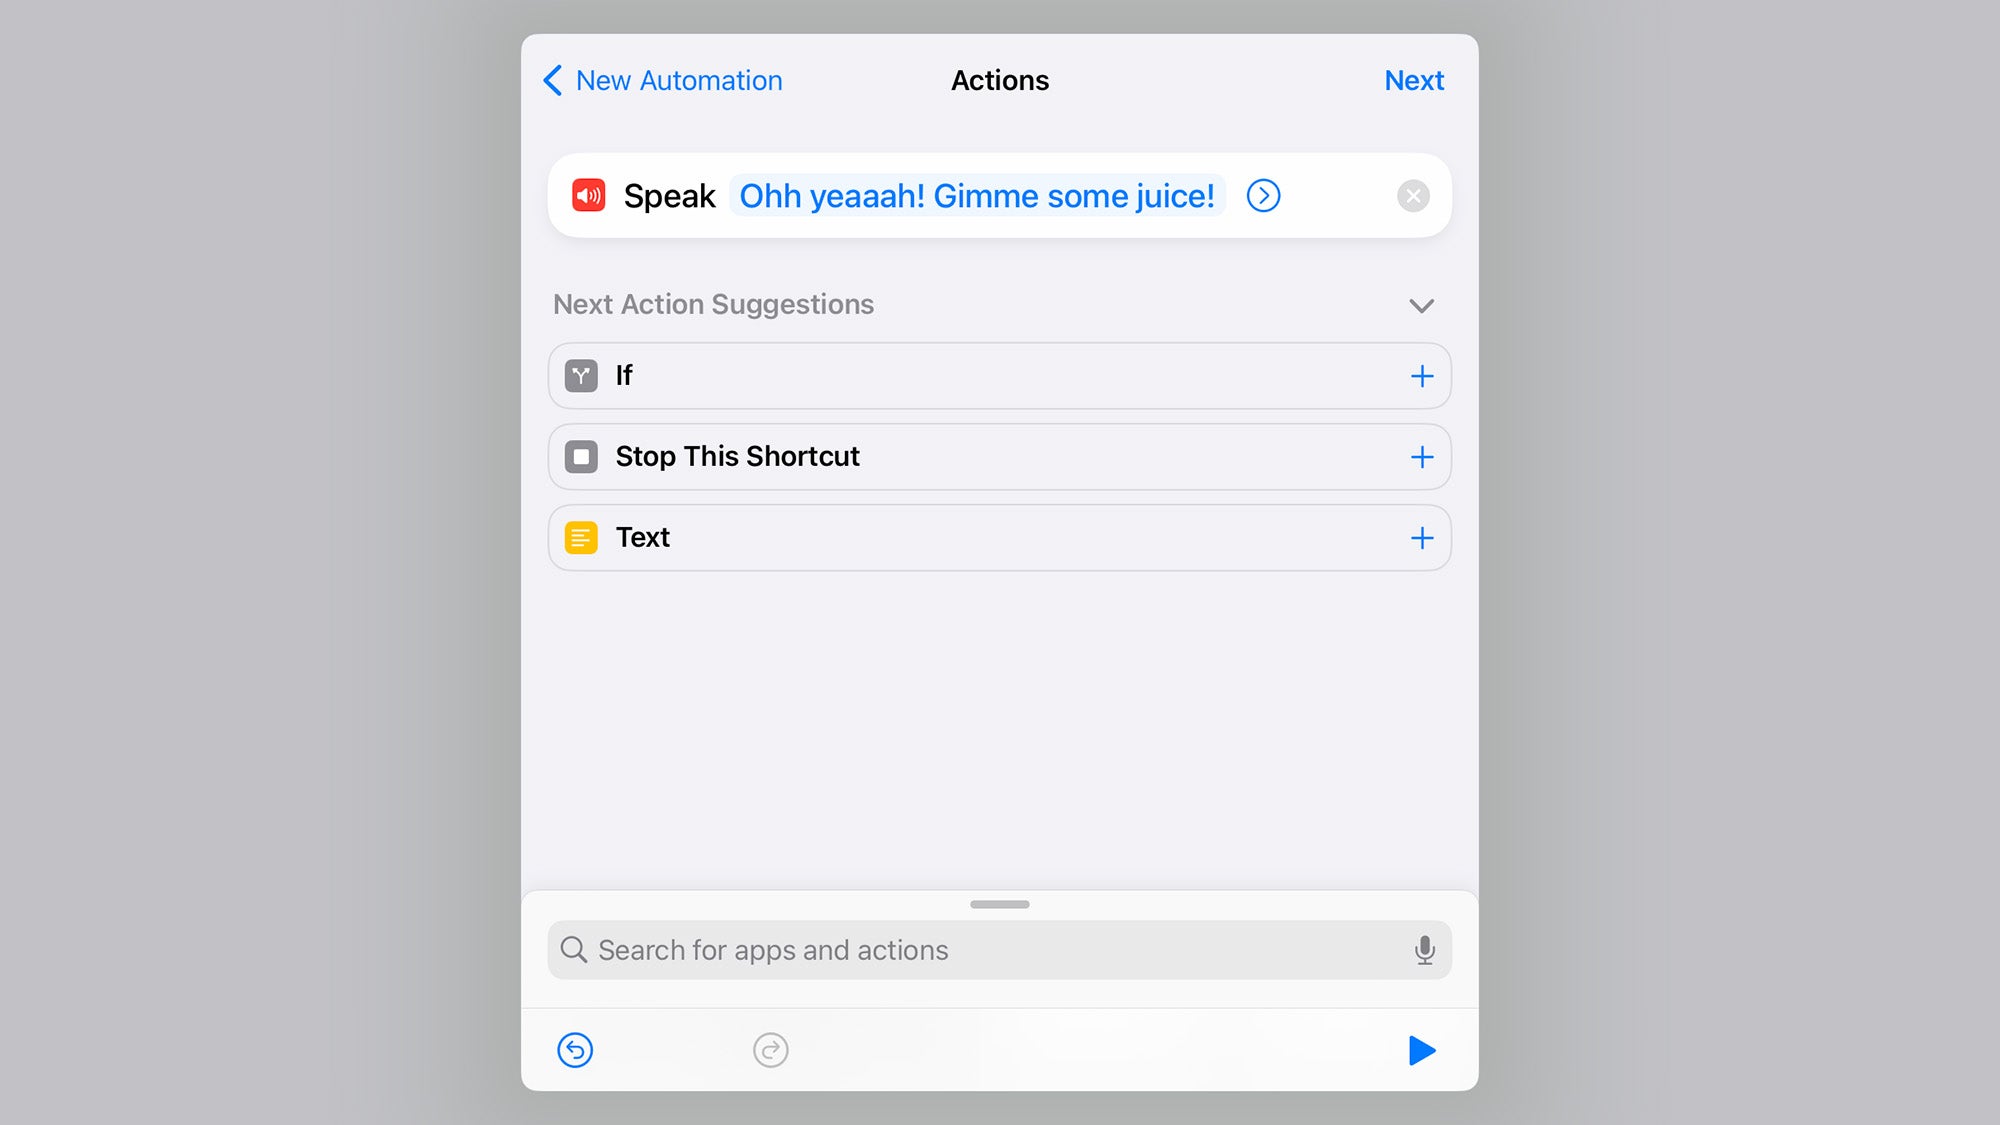 Action customization menu for iPhone automation